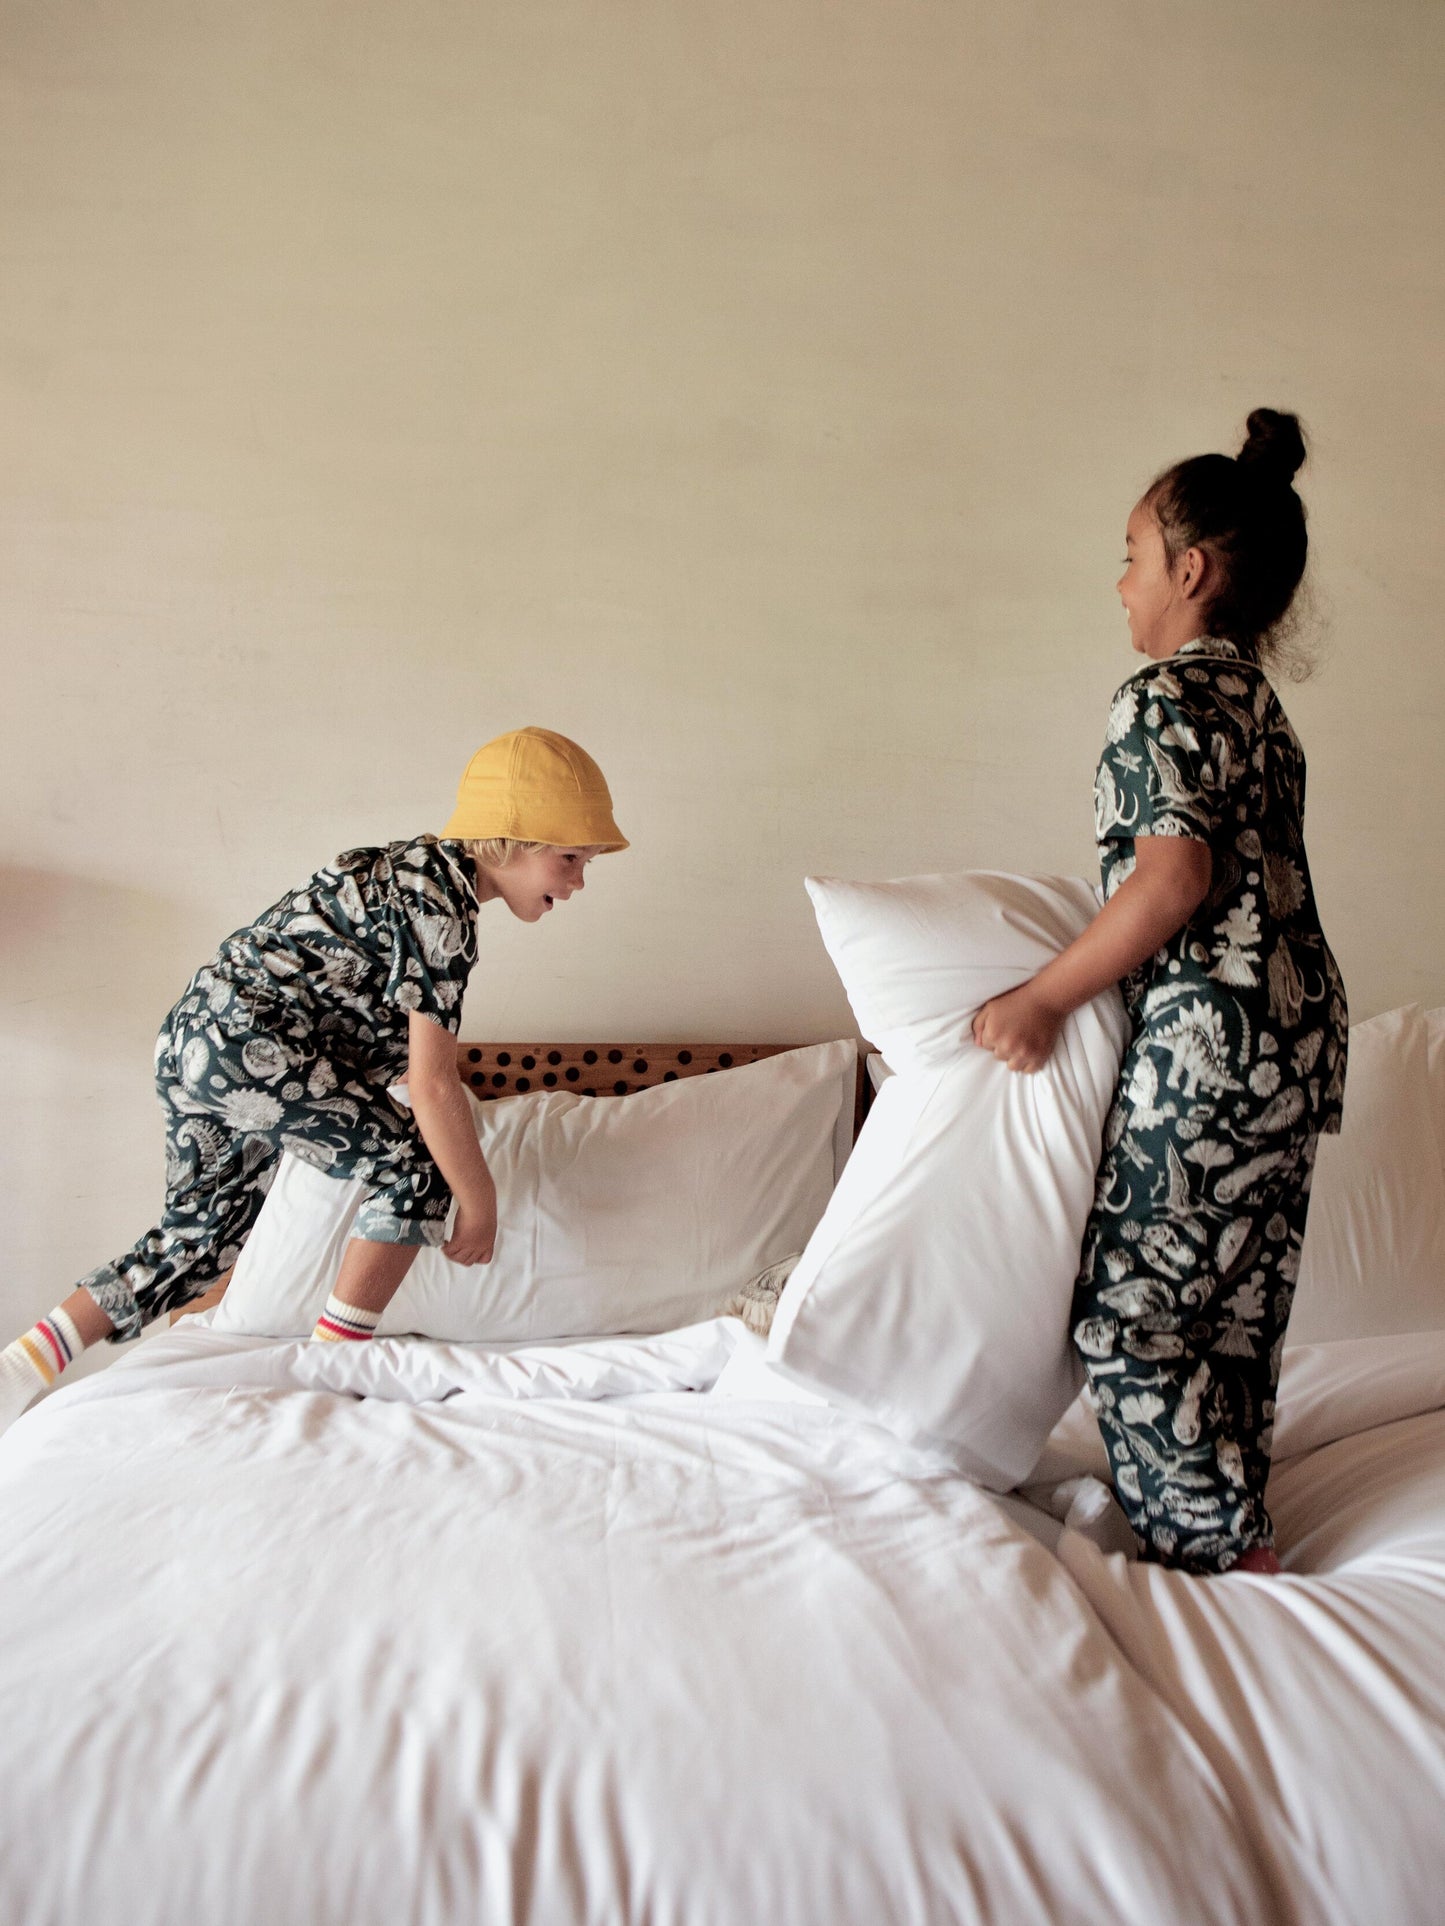 Pillow Fight! - Inspired by the beautiful prehistoric illustration by Tattoo-Artist Suflanda this Children Pyjama Set guarantes sweet dreams.